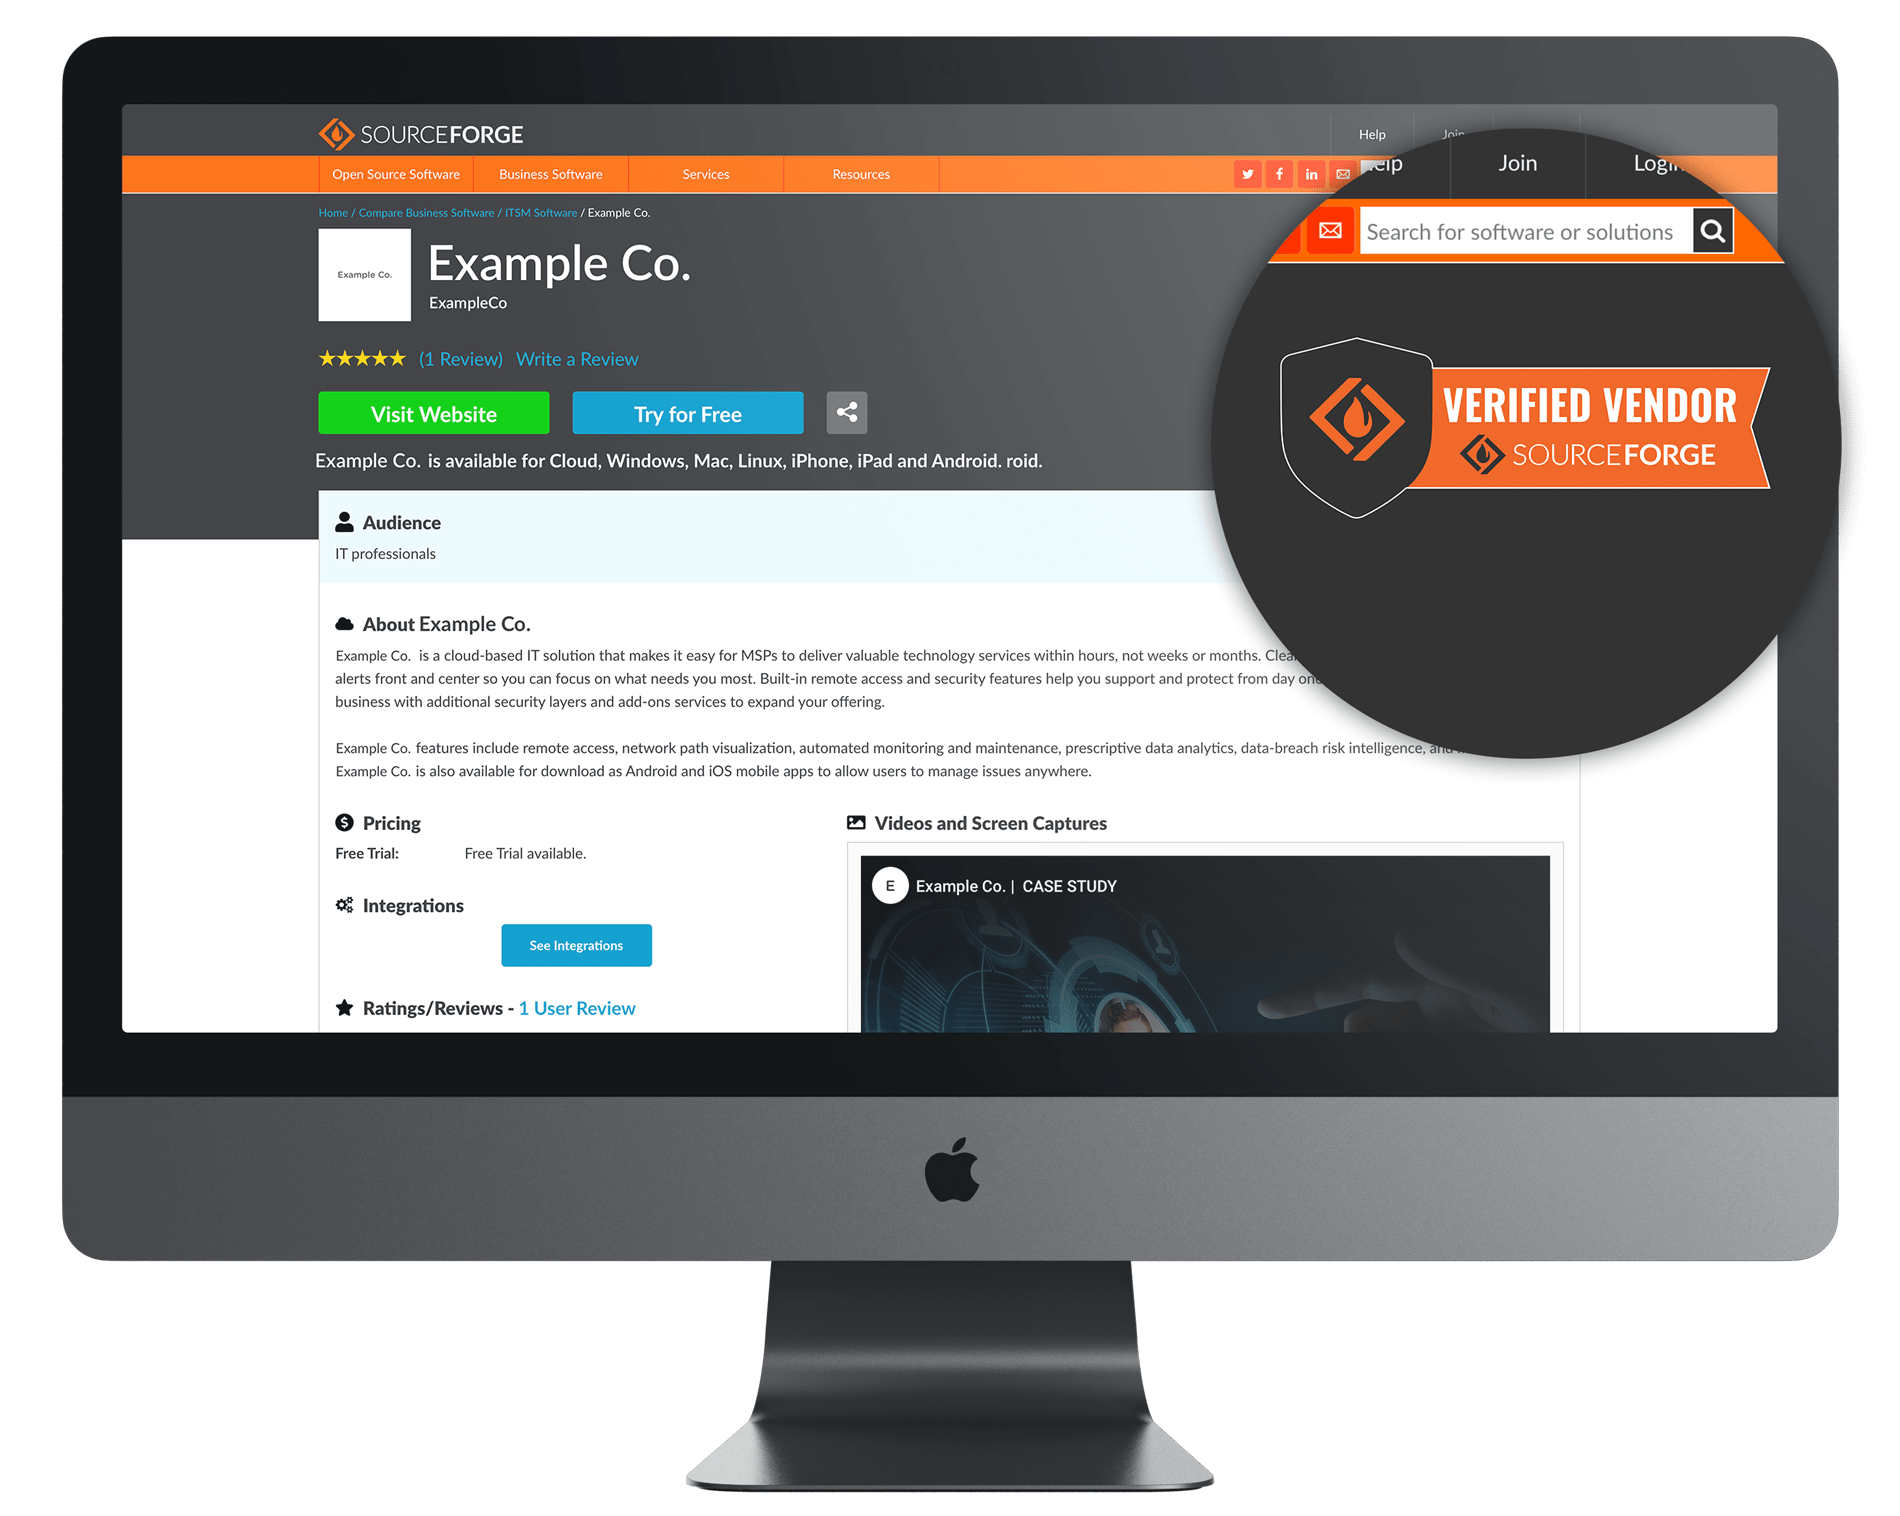  SourceForge Profile page example with verified vendor badge